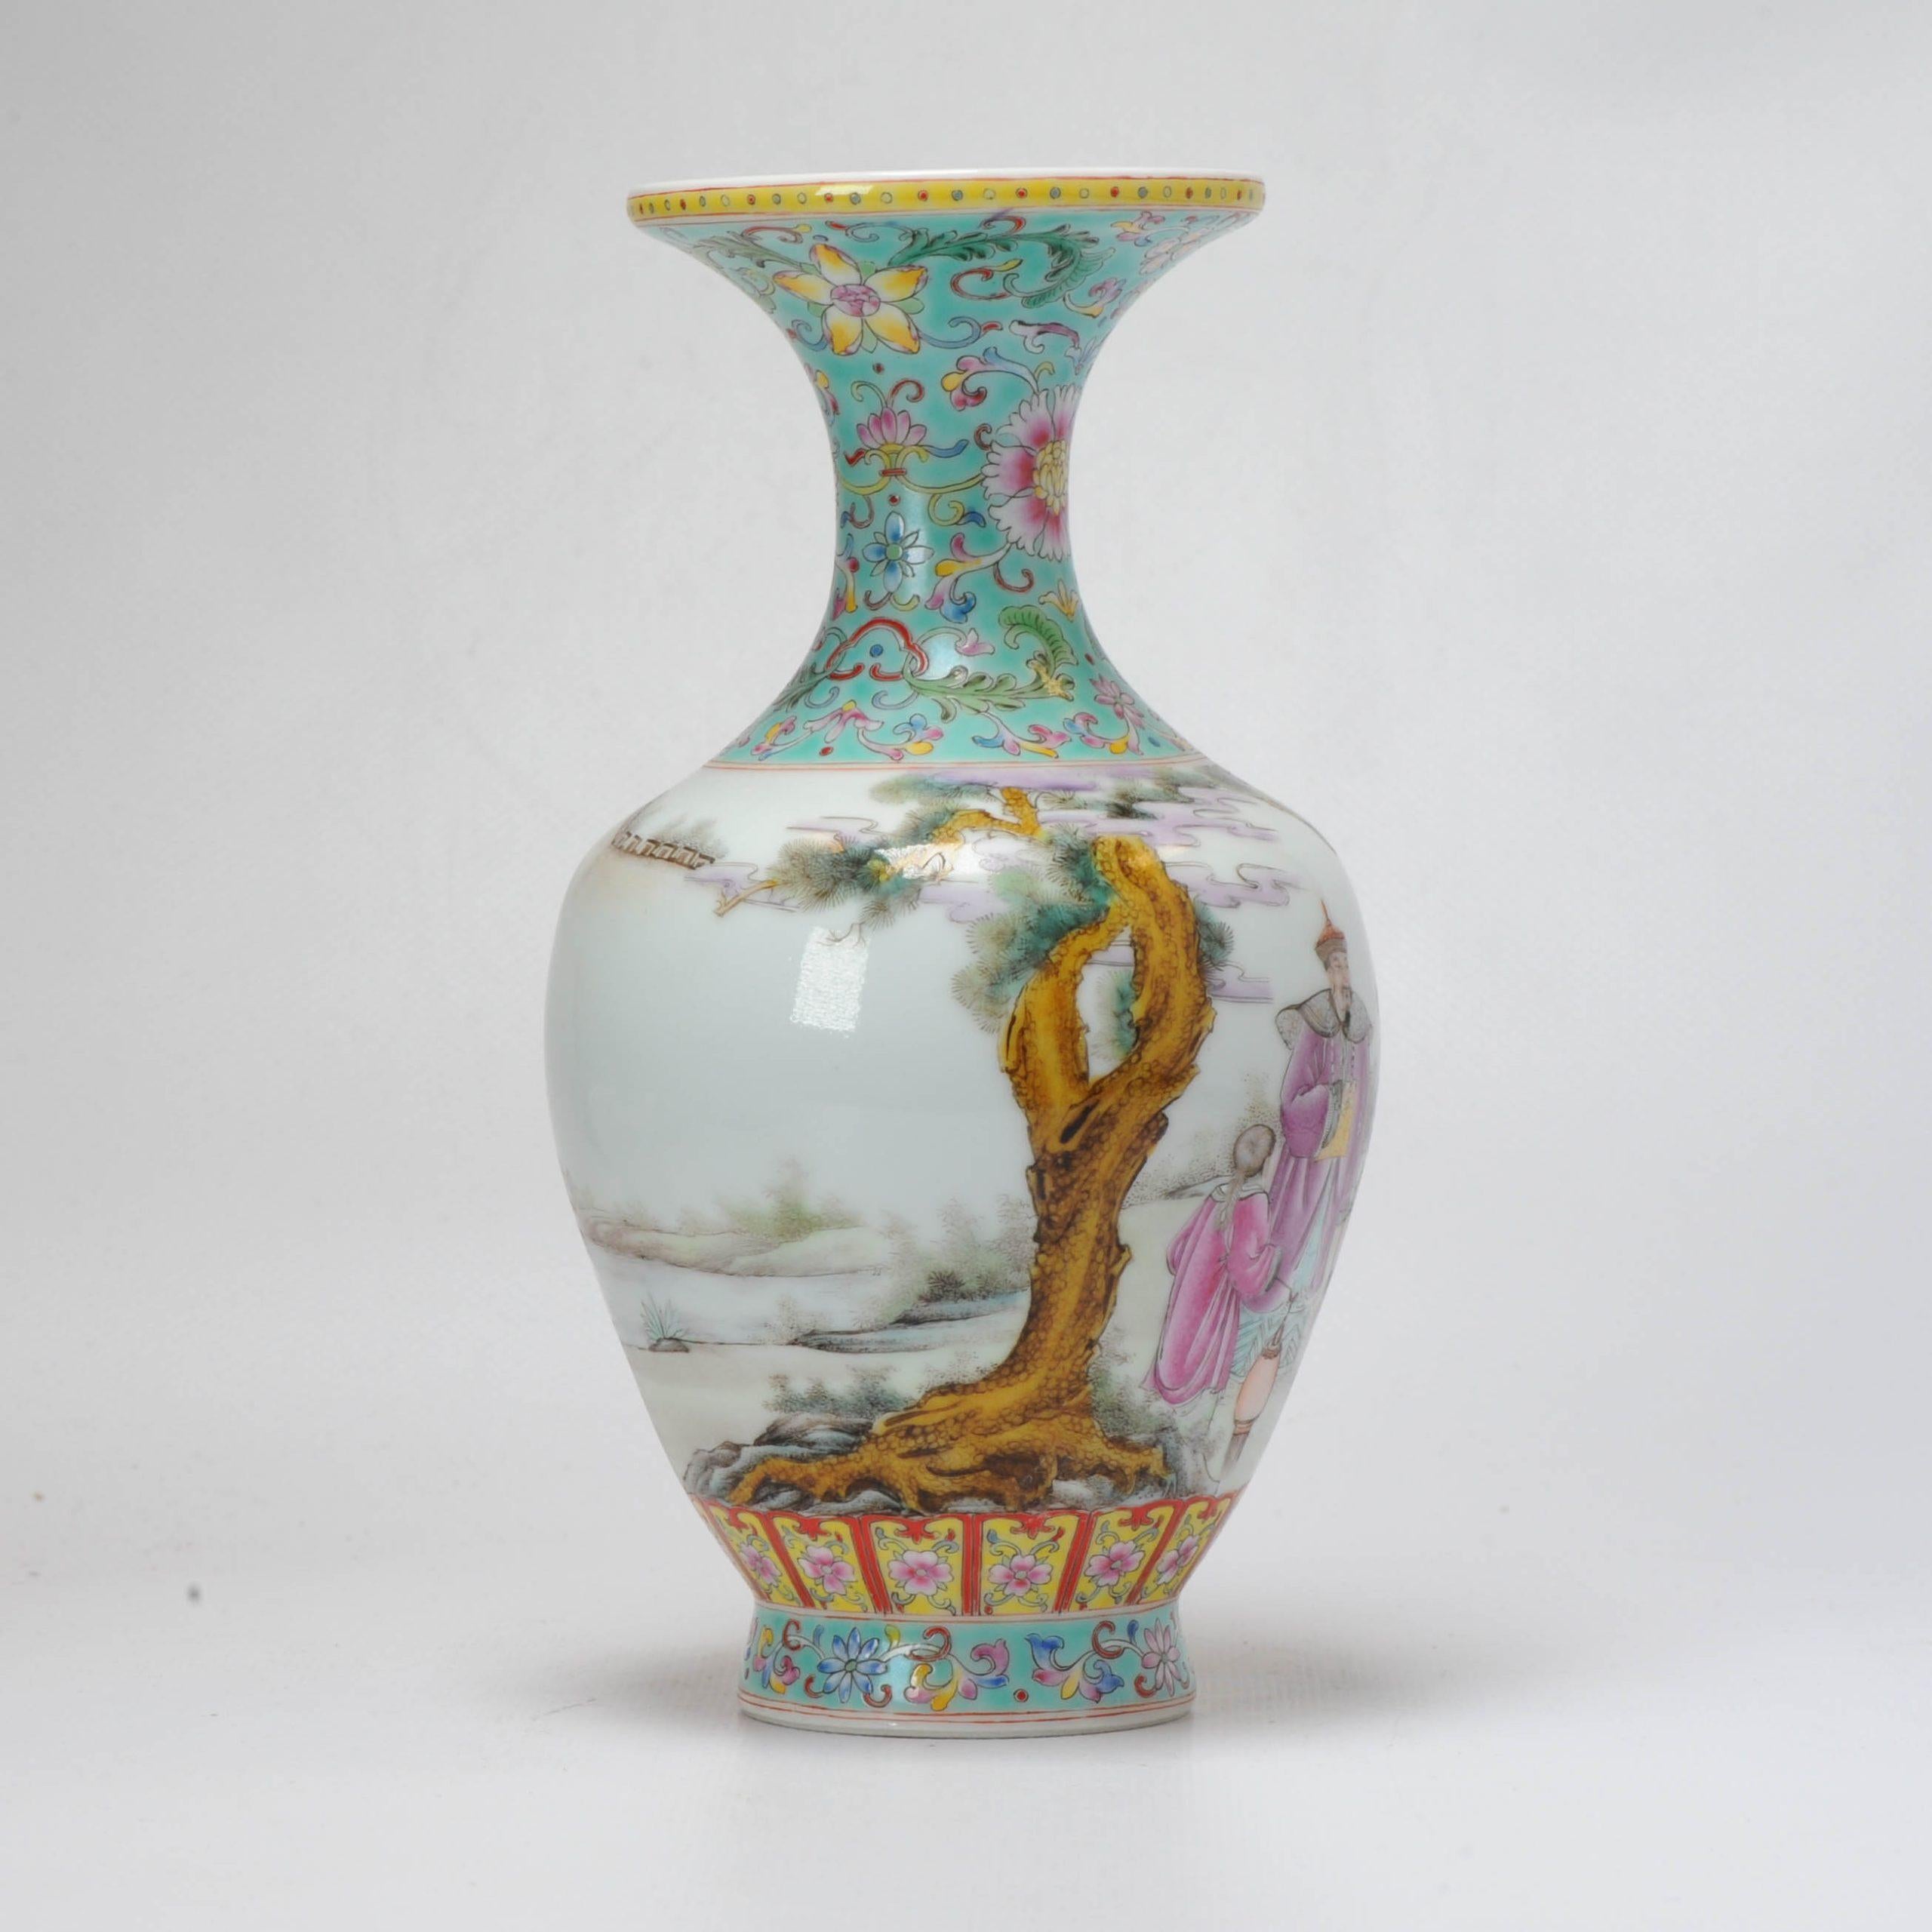 A polychrome porcelain vase, decorated with a landscape garden scene with figures. Marked with seal mark Qianlong at the base. China, 20th century.

Very nice and unusual scene and high quality painting.

Additional information:
Material: Porcelain